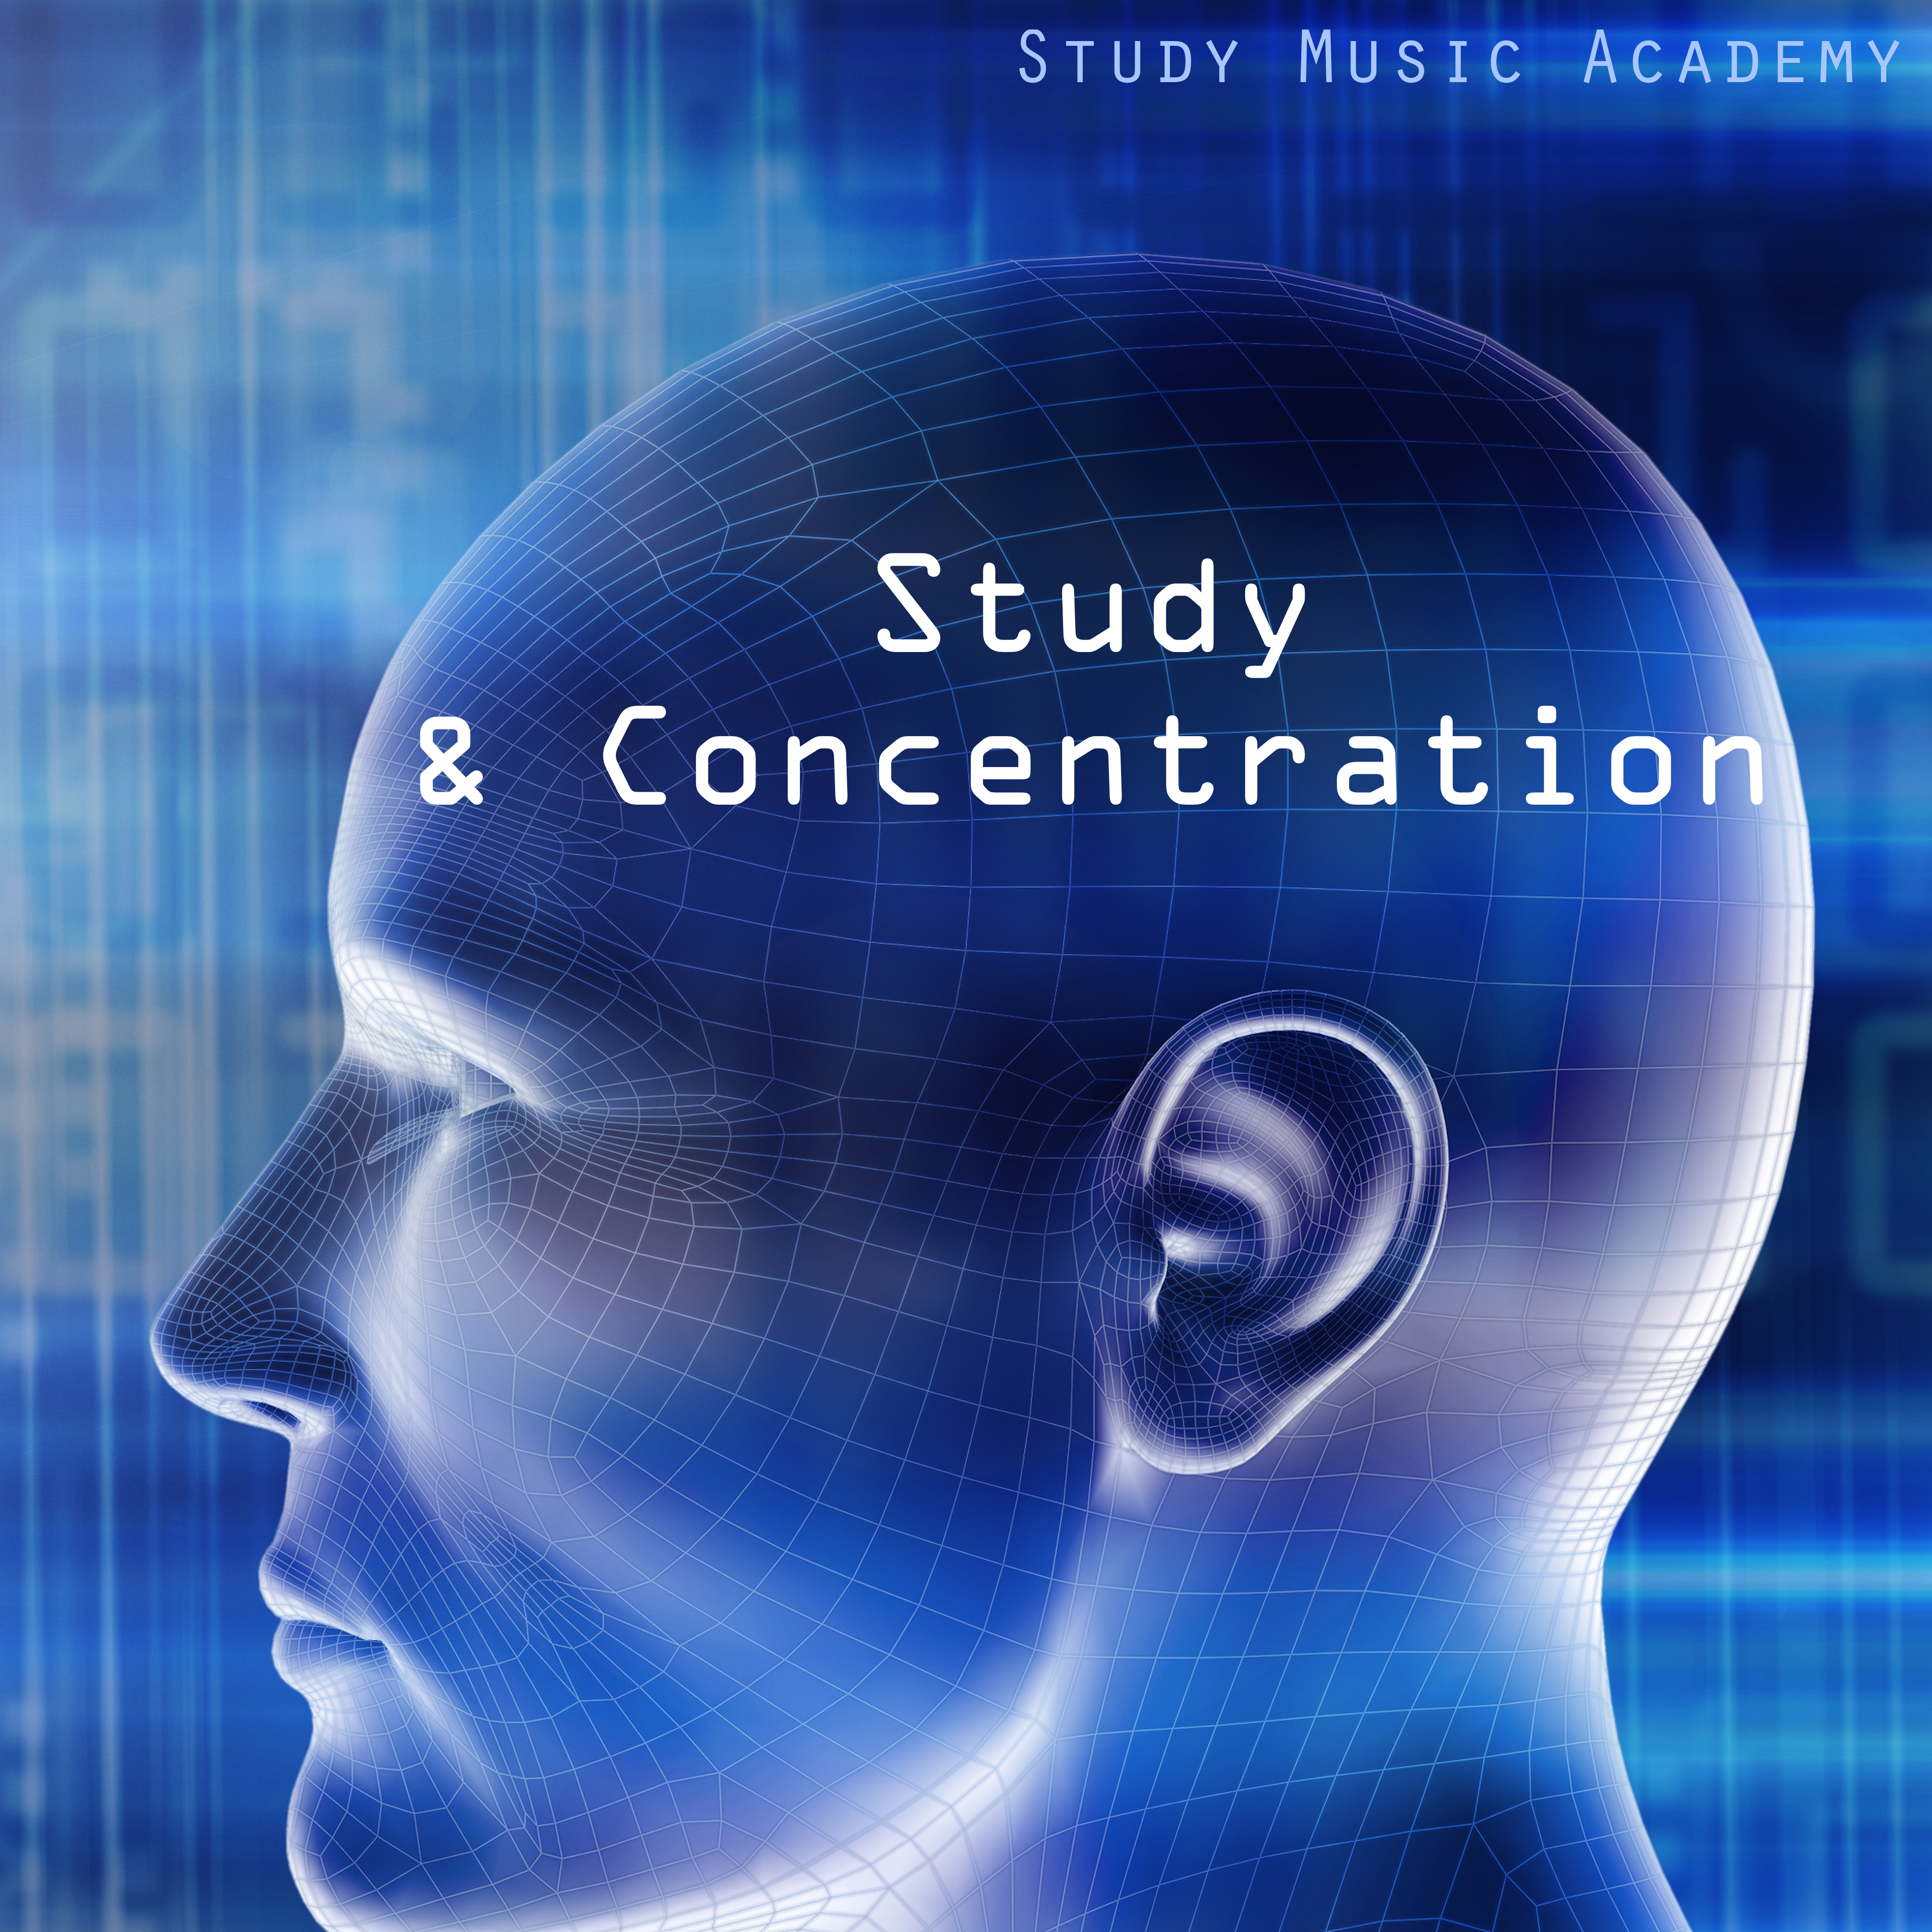 Improve Your Learning with Study Music